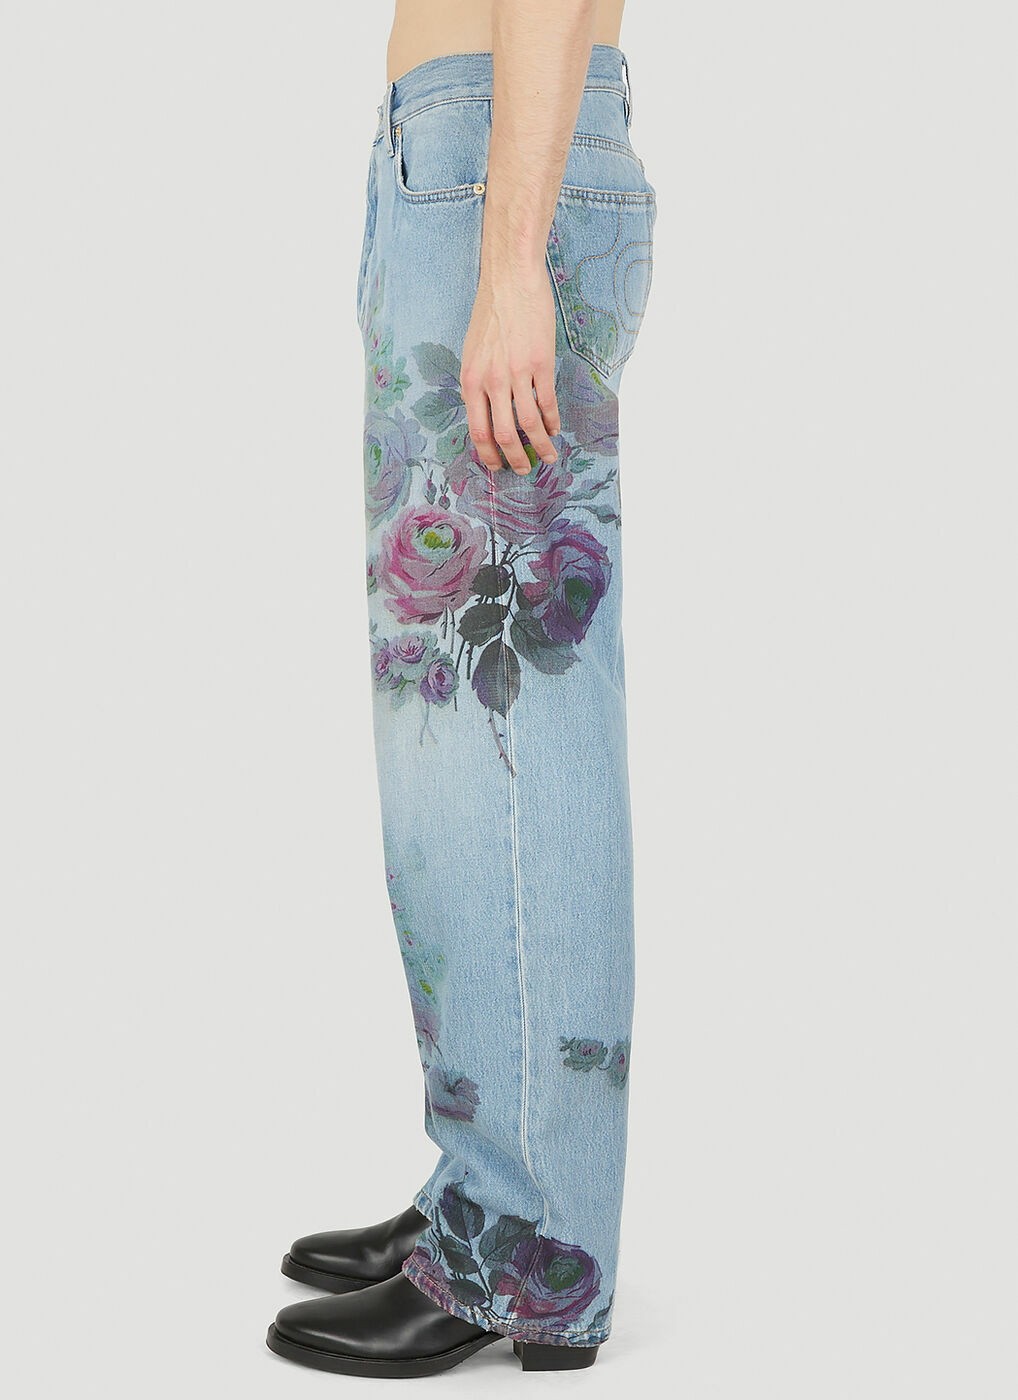 Eytys - Benz Bloom Jeans in Blue Eytys